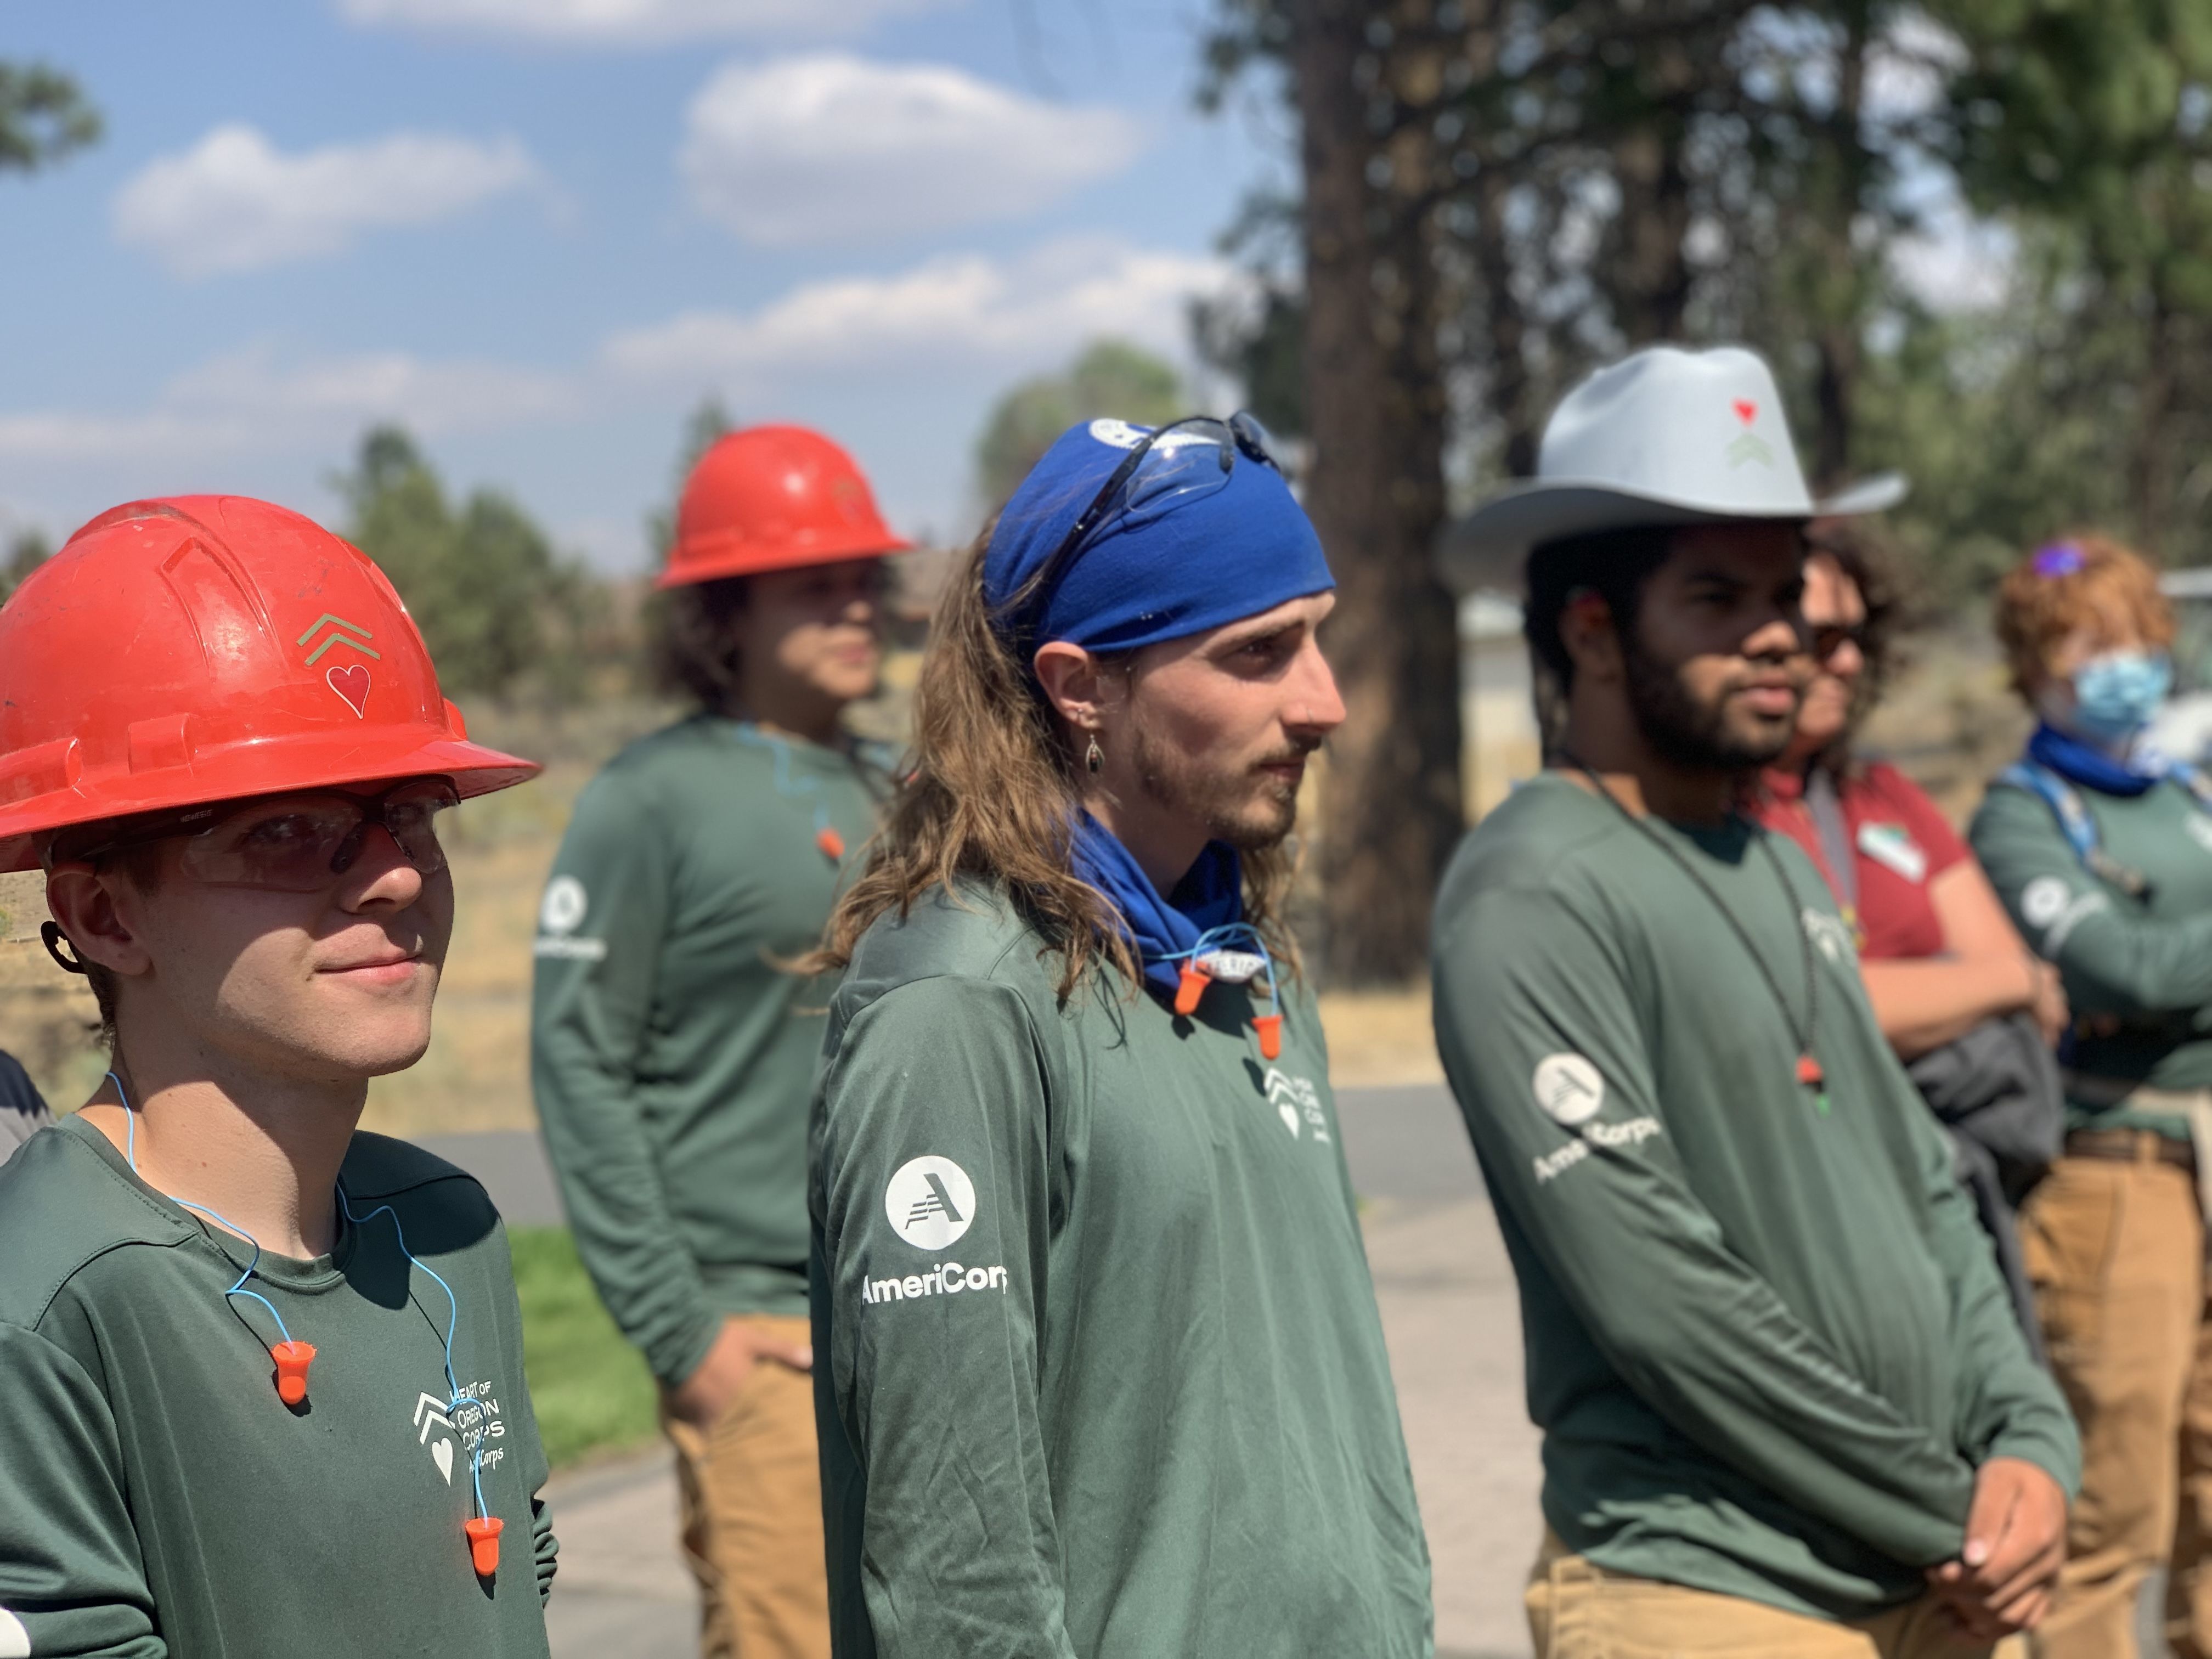 Heart of Oregon Corps’ new crew will hit the trails on Ochoco Natl. Forest, Crooked River Grassland